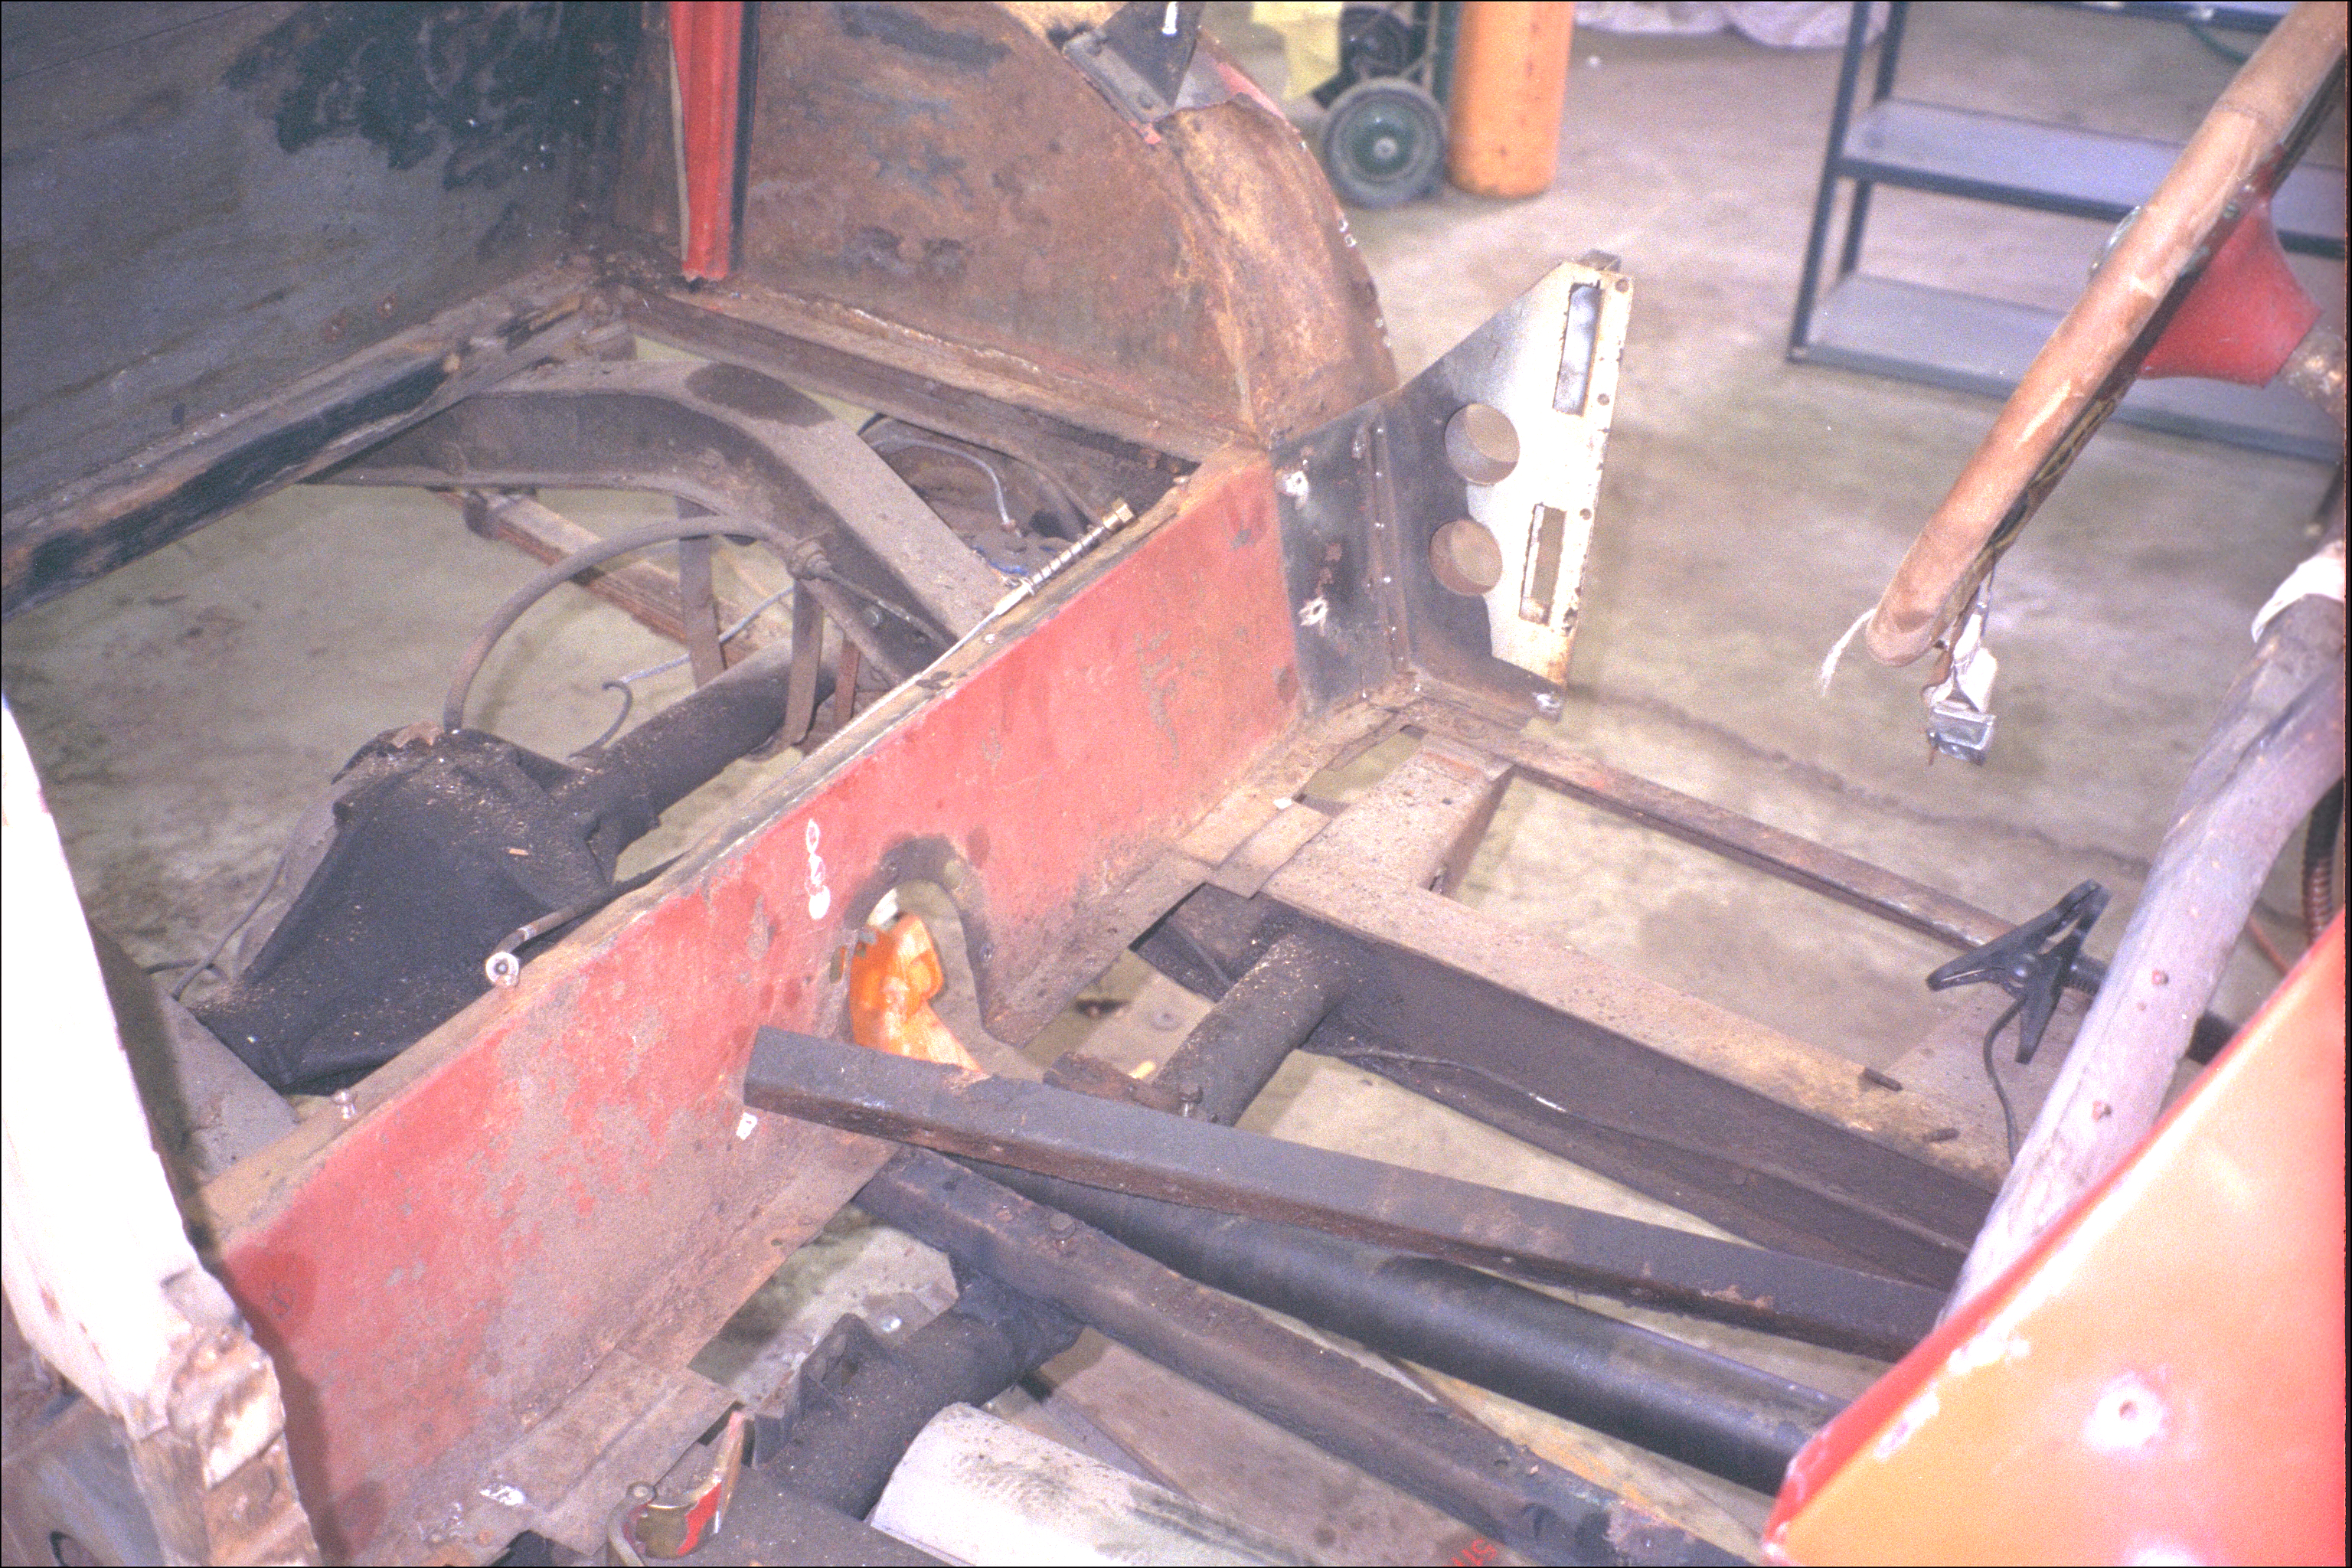 Drive shaft, with angle iron shaft supports